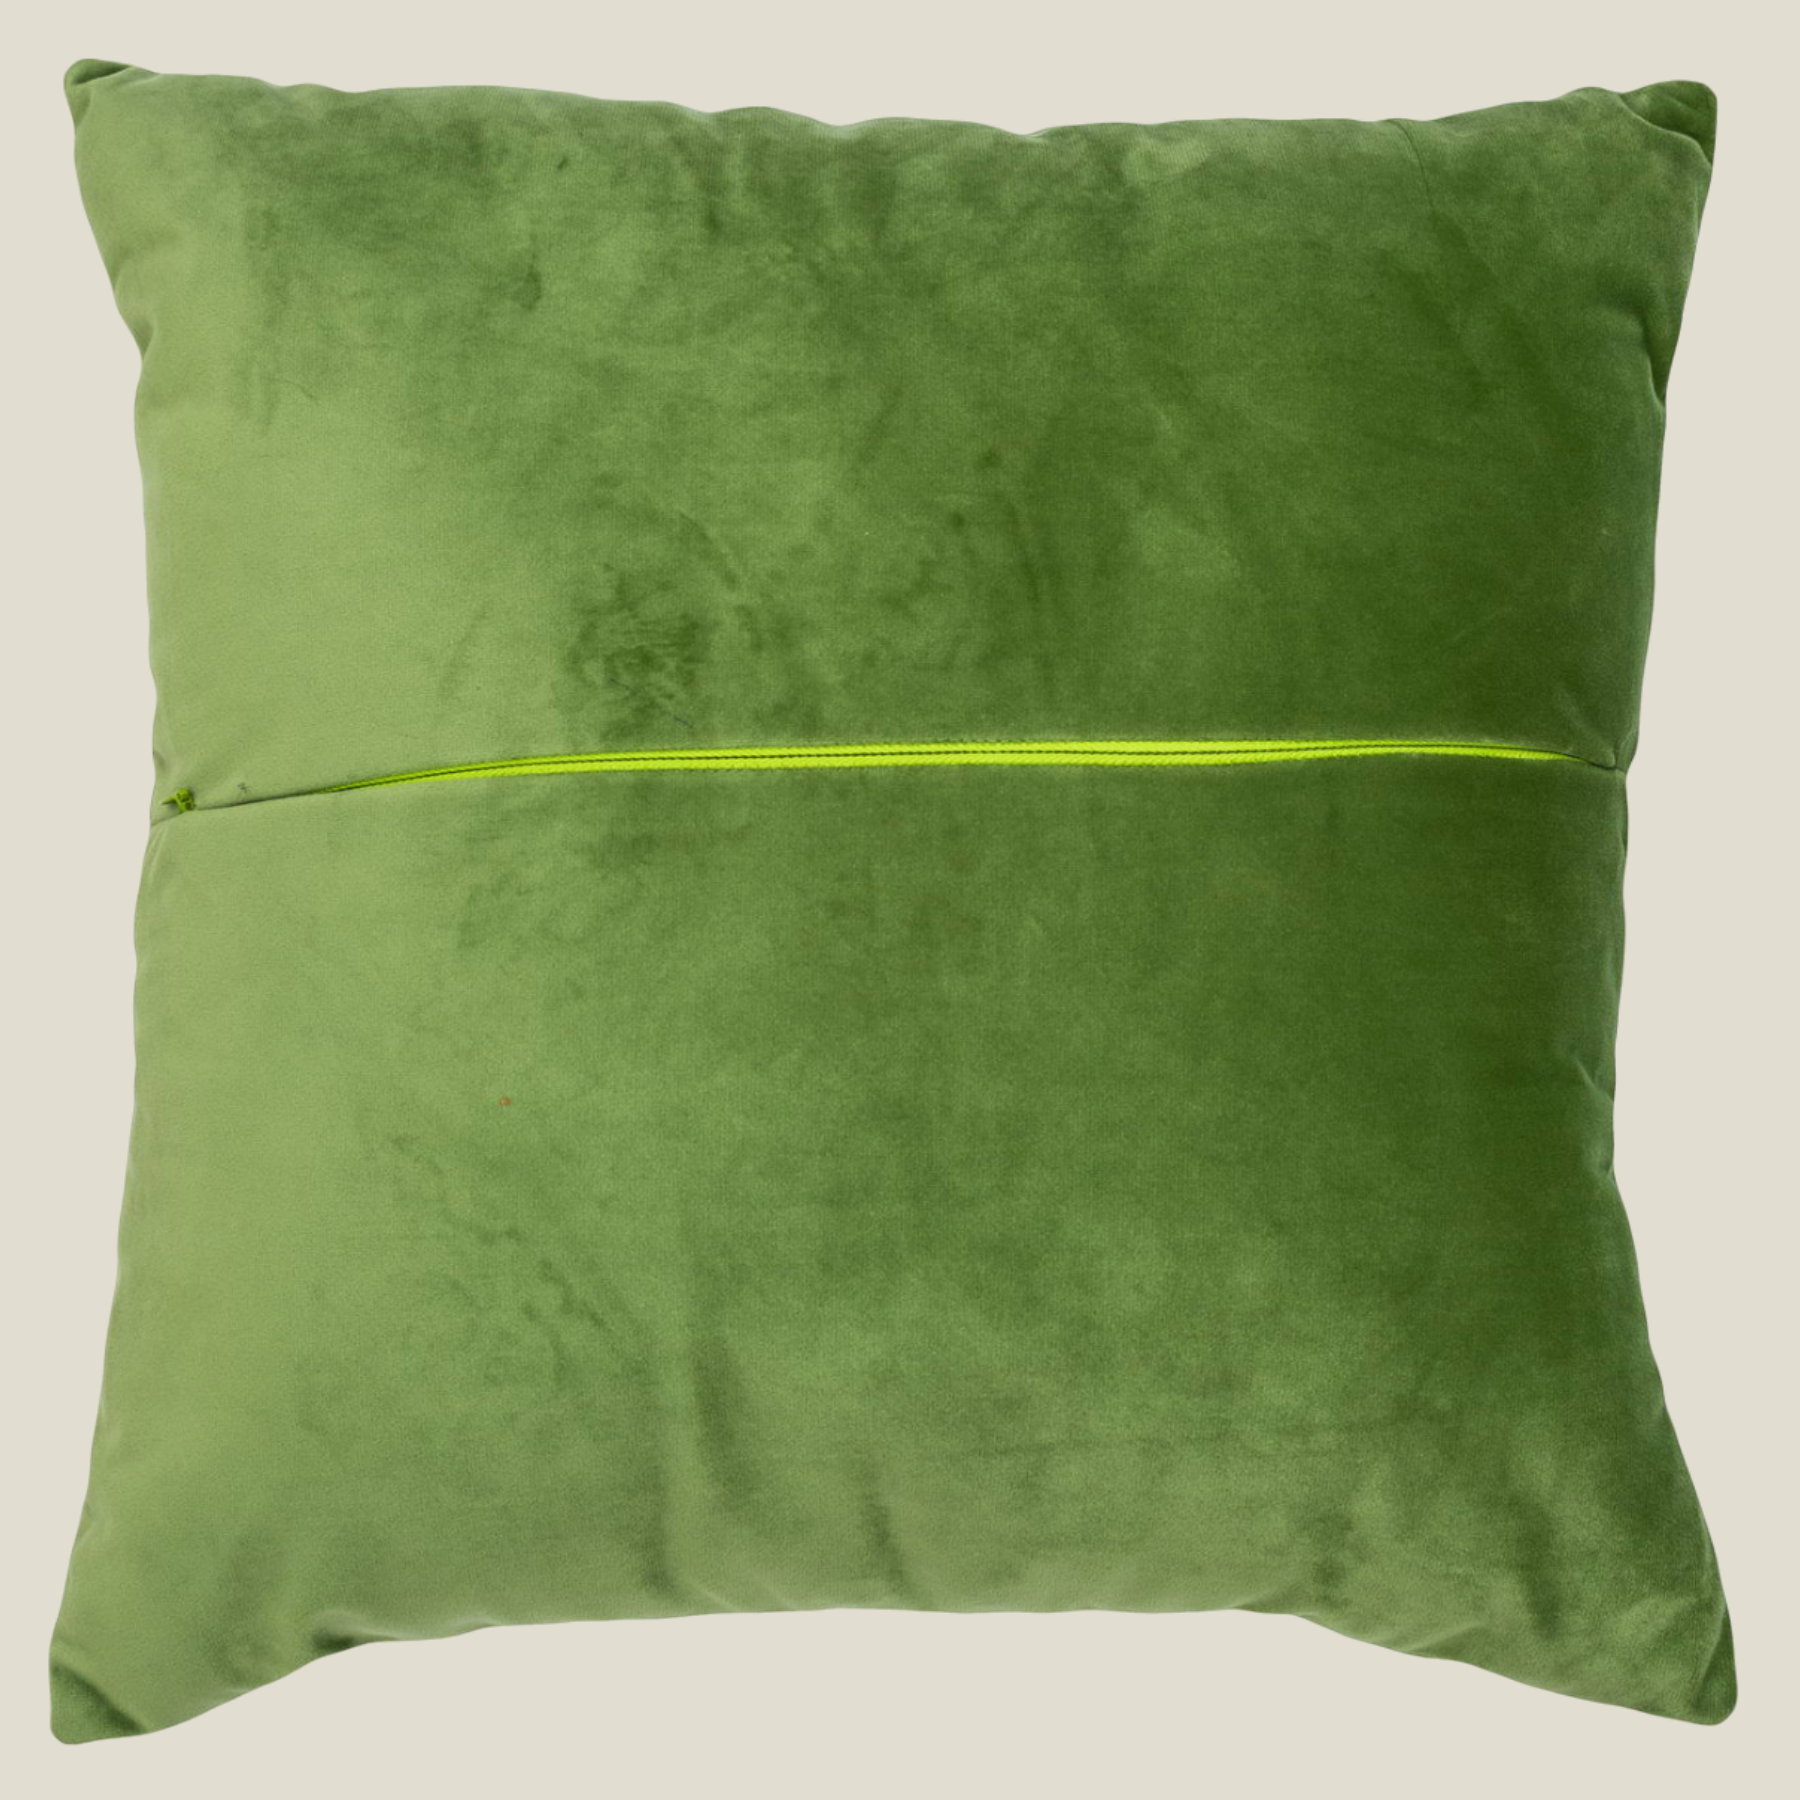 The Luxelife Green Velvet Floral Fully Embroidered Cushion Cover